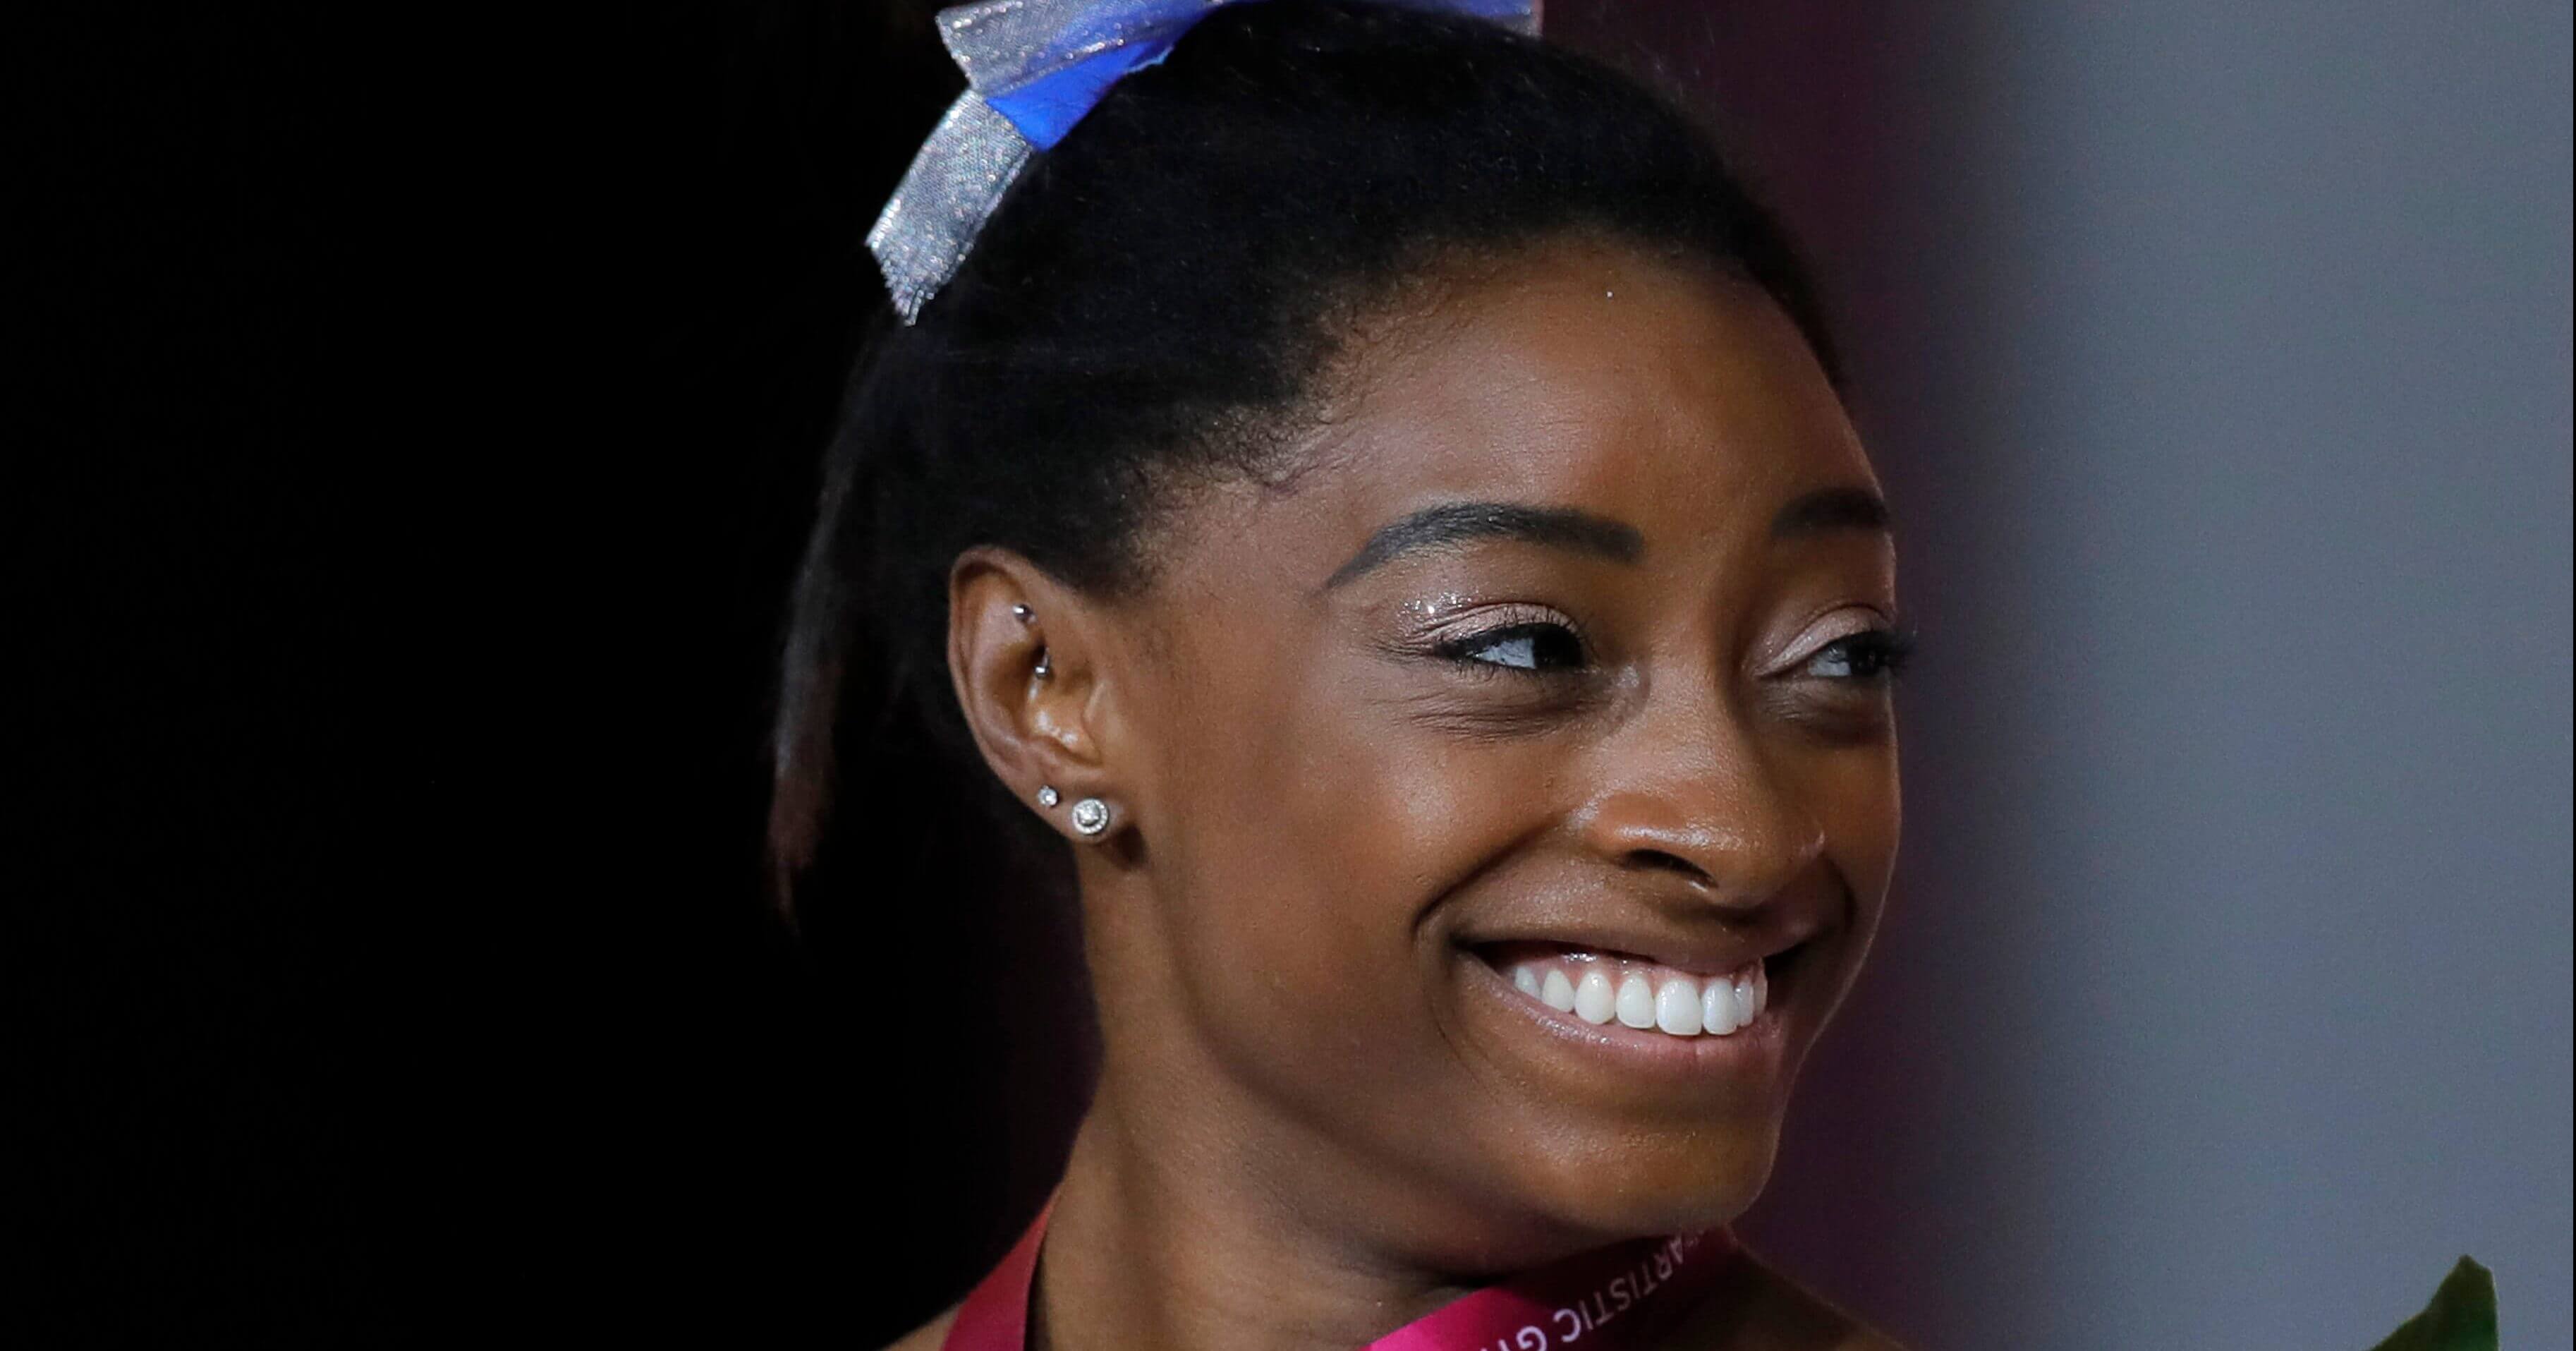 Simone Biles of the U.S. holds her silver medal after the women's uneven bars final on the first day of the apparatus finals of the Gymnastics World Championships at the Aspire Dome in Doha, Qatar, on Friday.